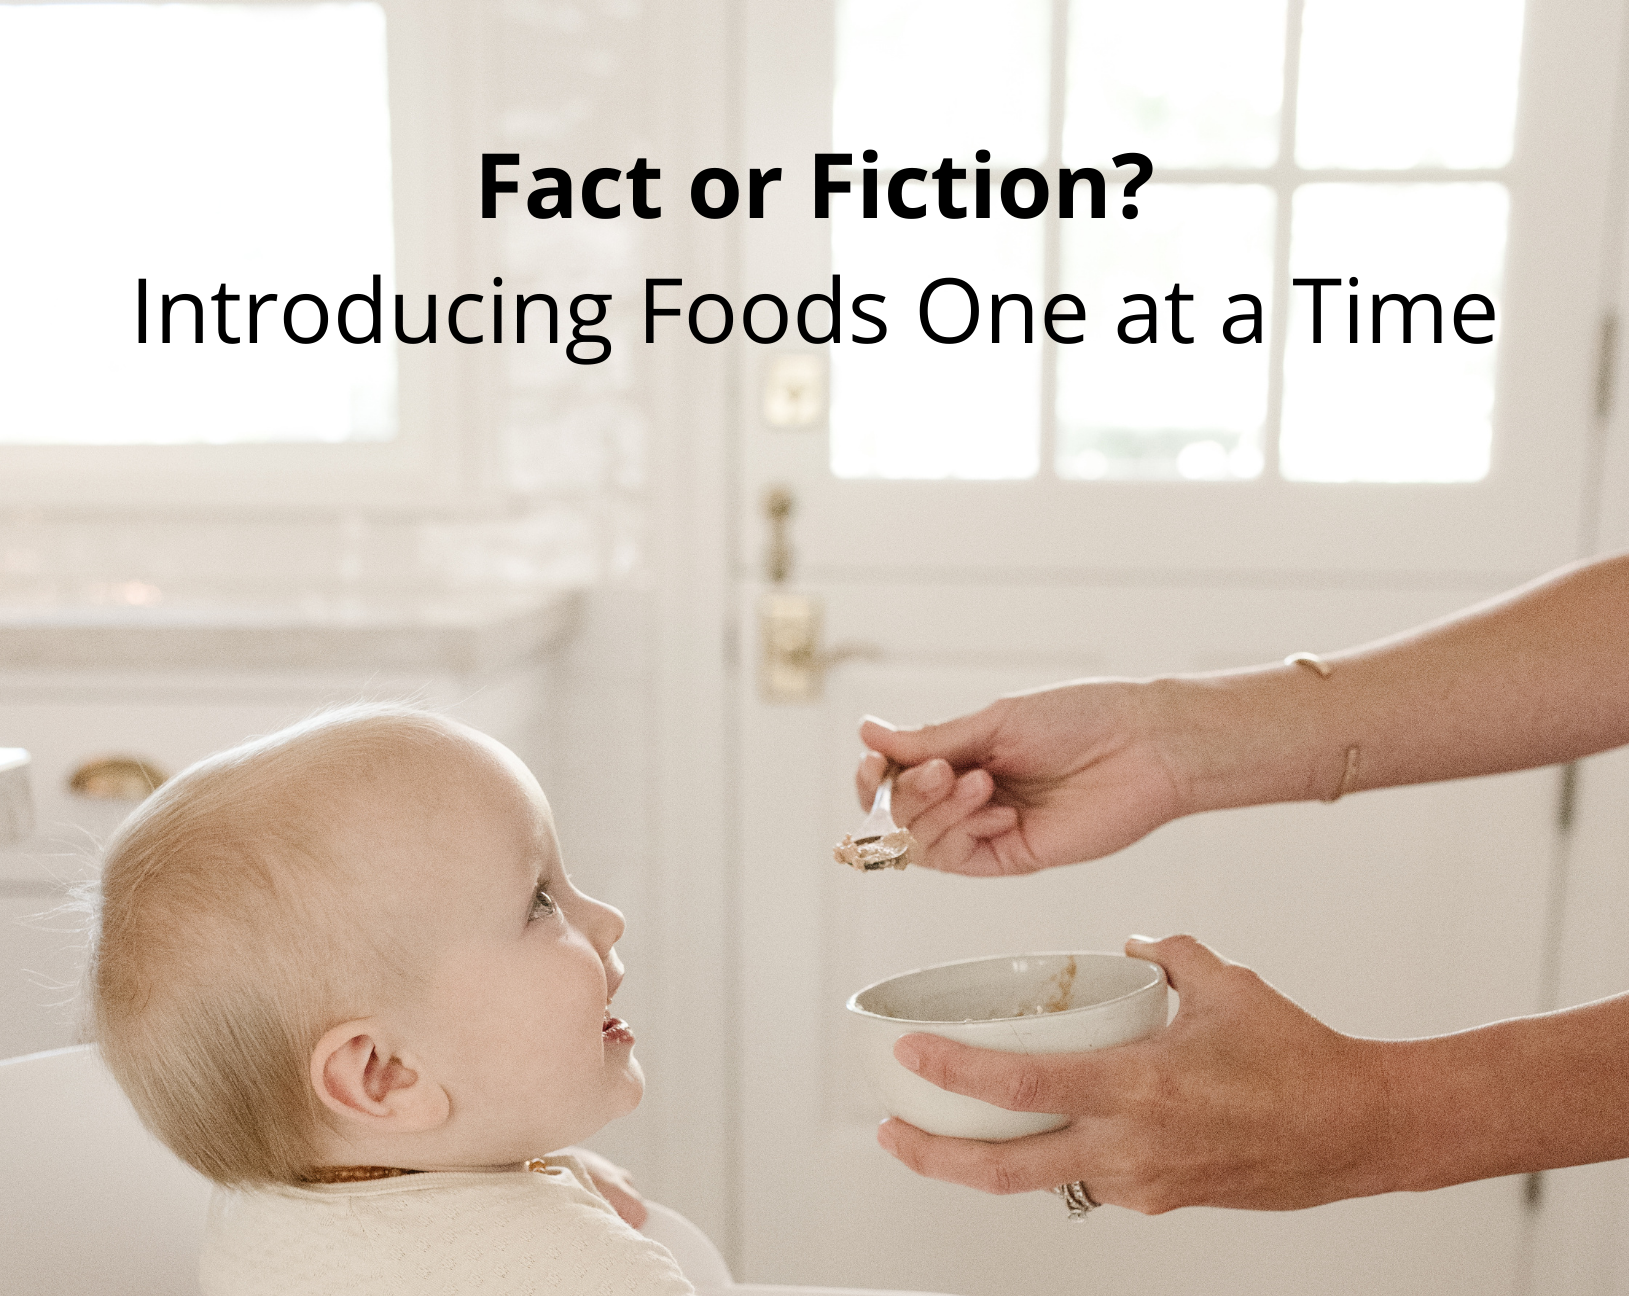 introducing foods one at a time to baby